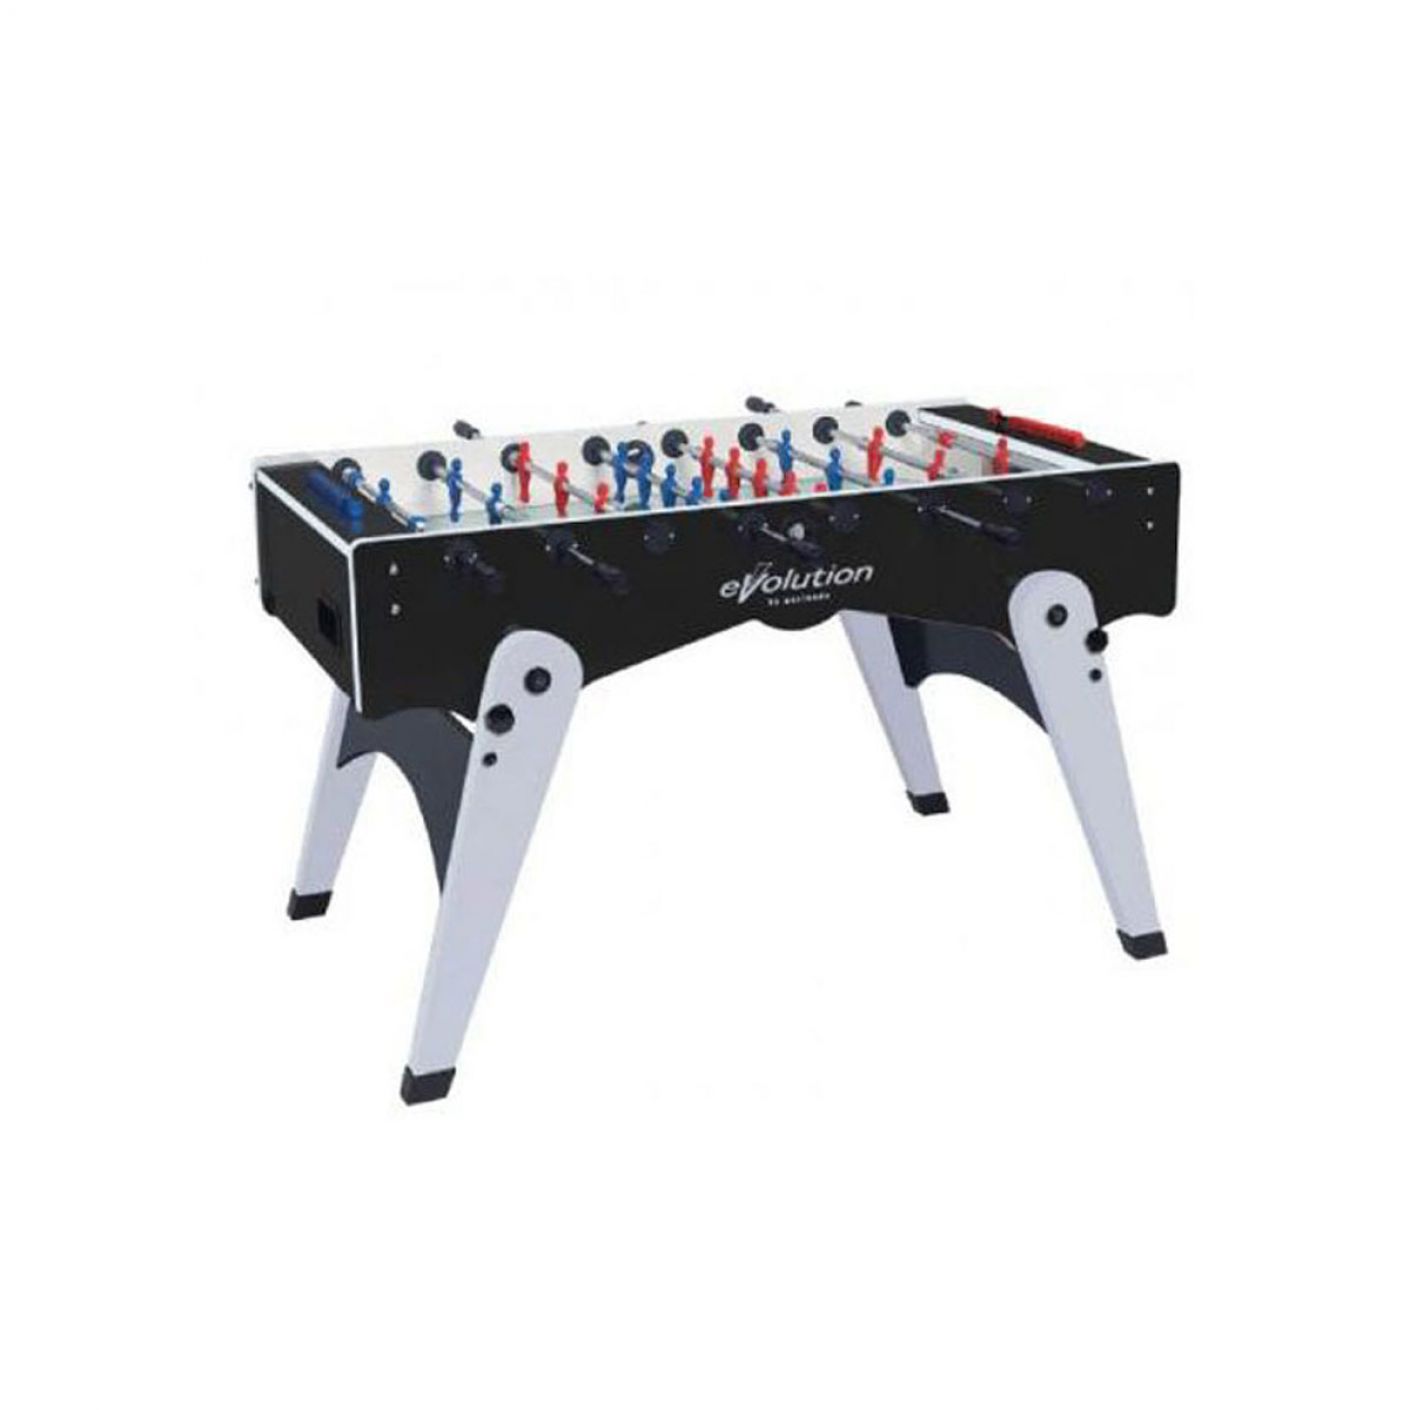 Garlando Table Football Foldy EVOLUTION with outgoing rods, folding legs